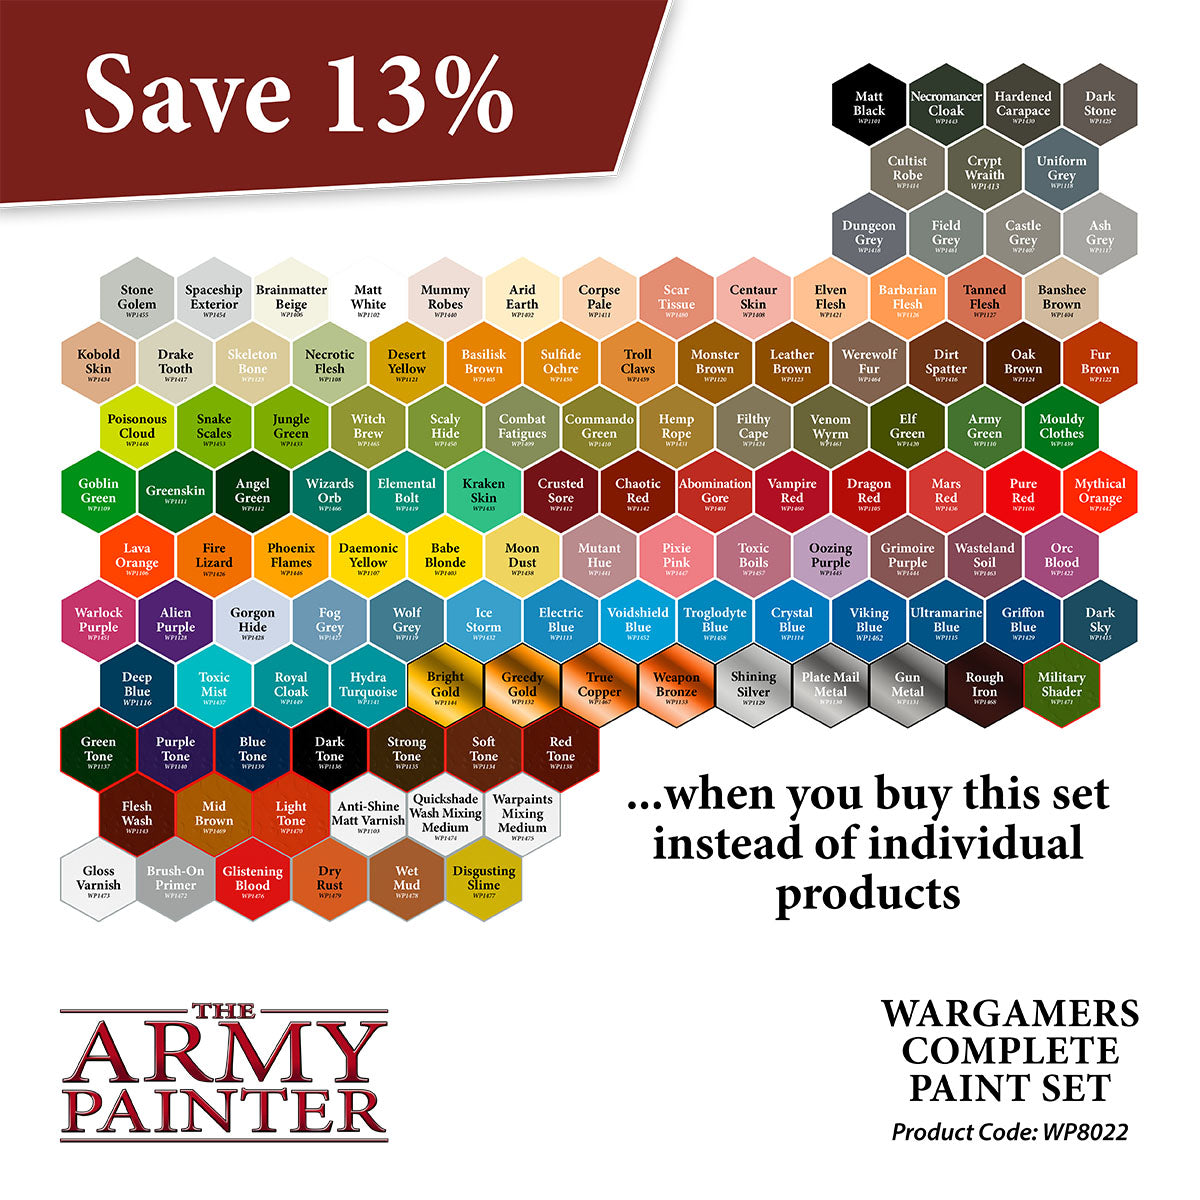 The Army Painter - Warpaints Fanatic - Washes Set - Discount Games Inc